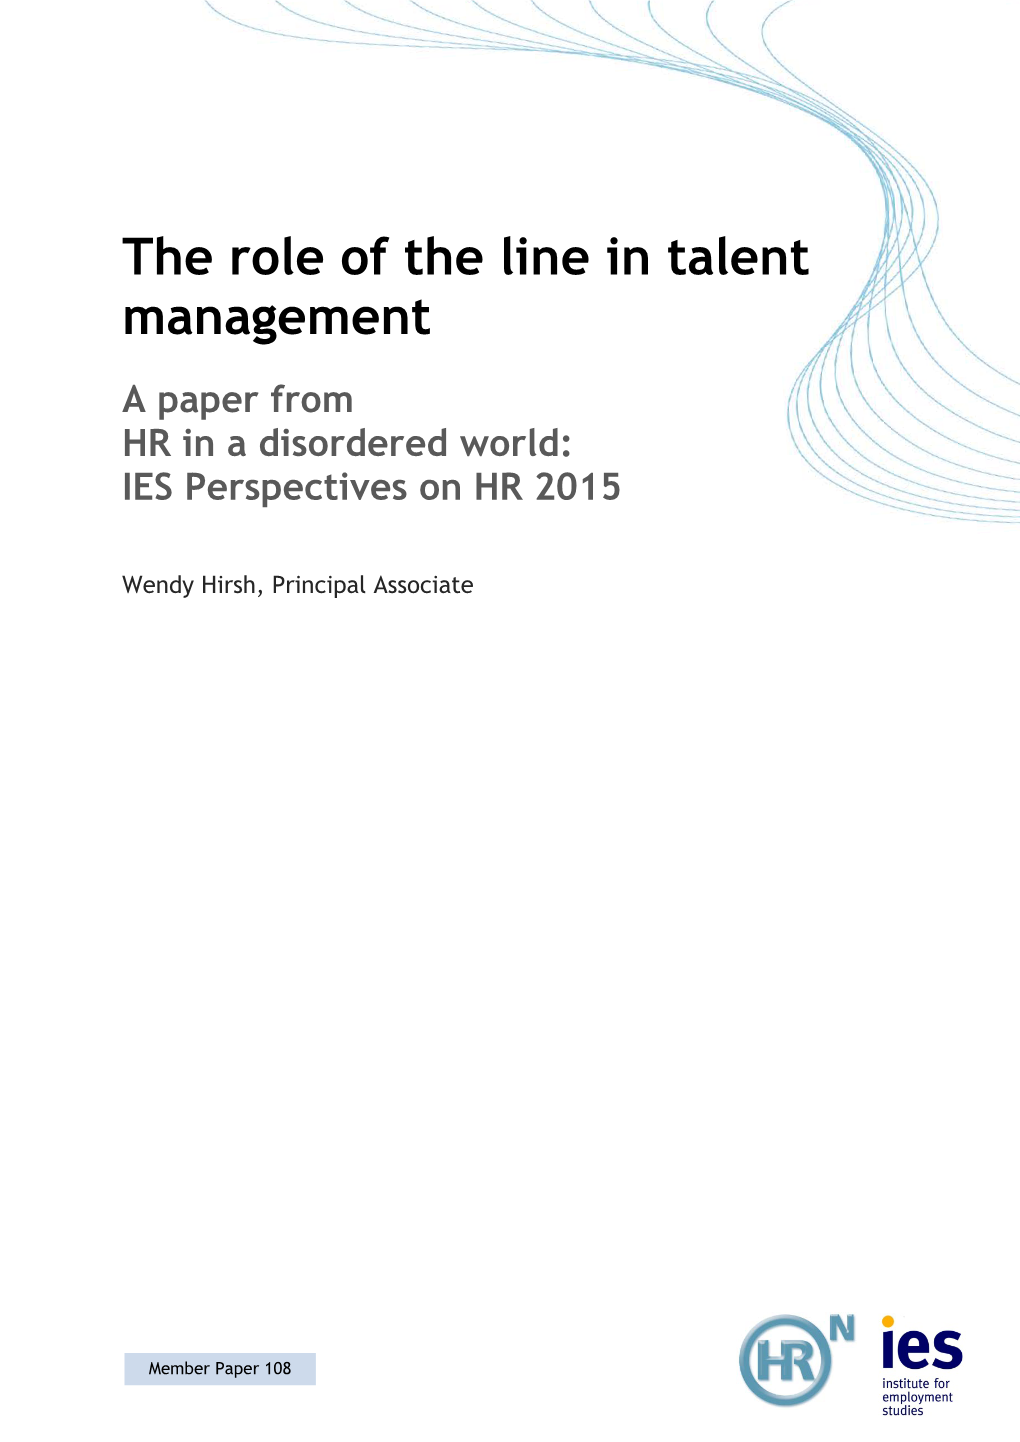 The Role of the Line in Talent Management a Paper from HR in a Disordered World: IES Perspectives on HR 2015